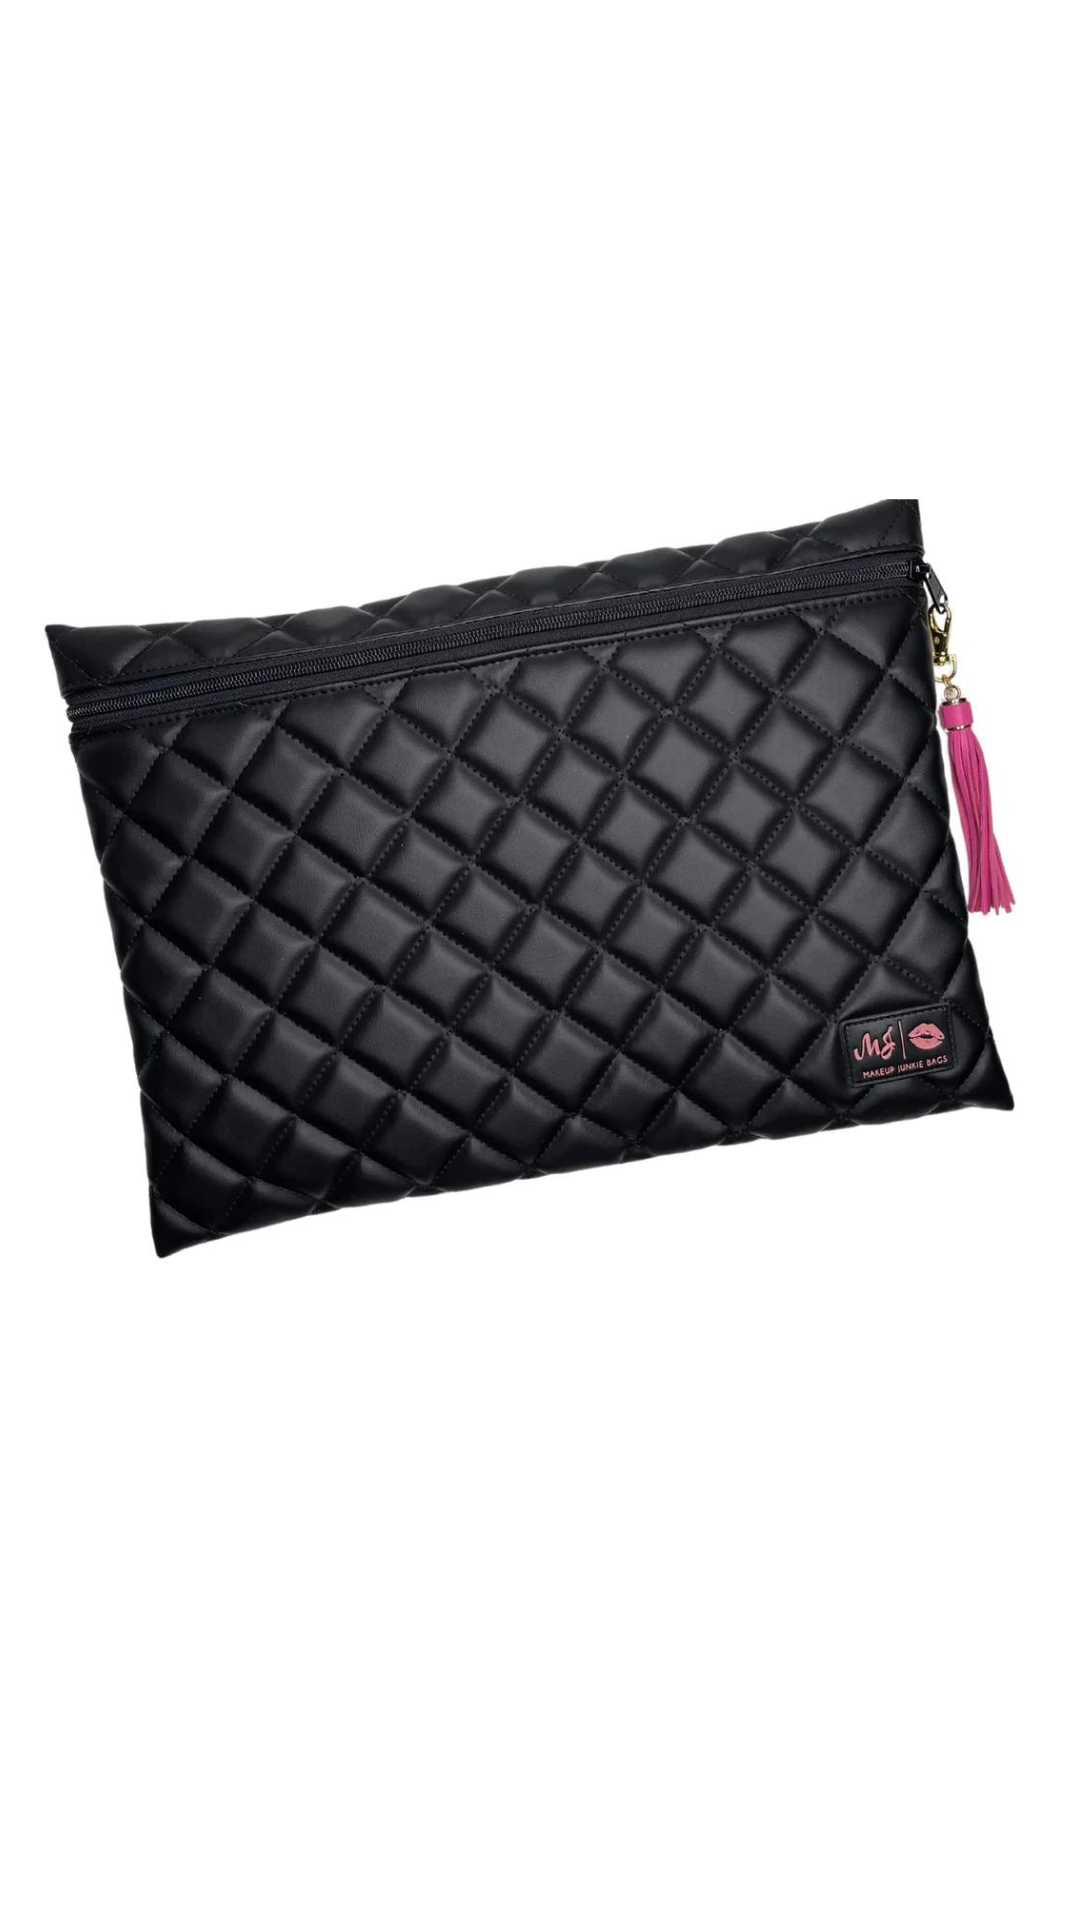 Live Takeover: Jumbo Top Zipper- Quilted Onyx by Makeup Junkie (Ships in 4-5 weeks)